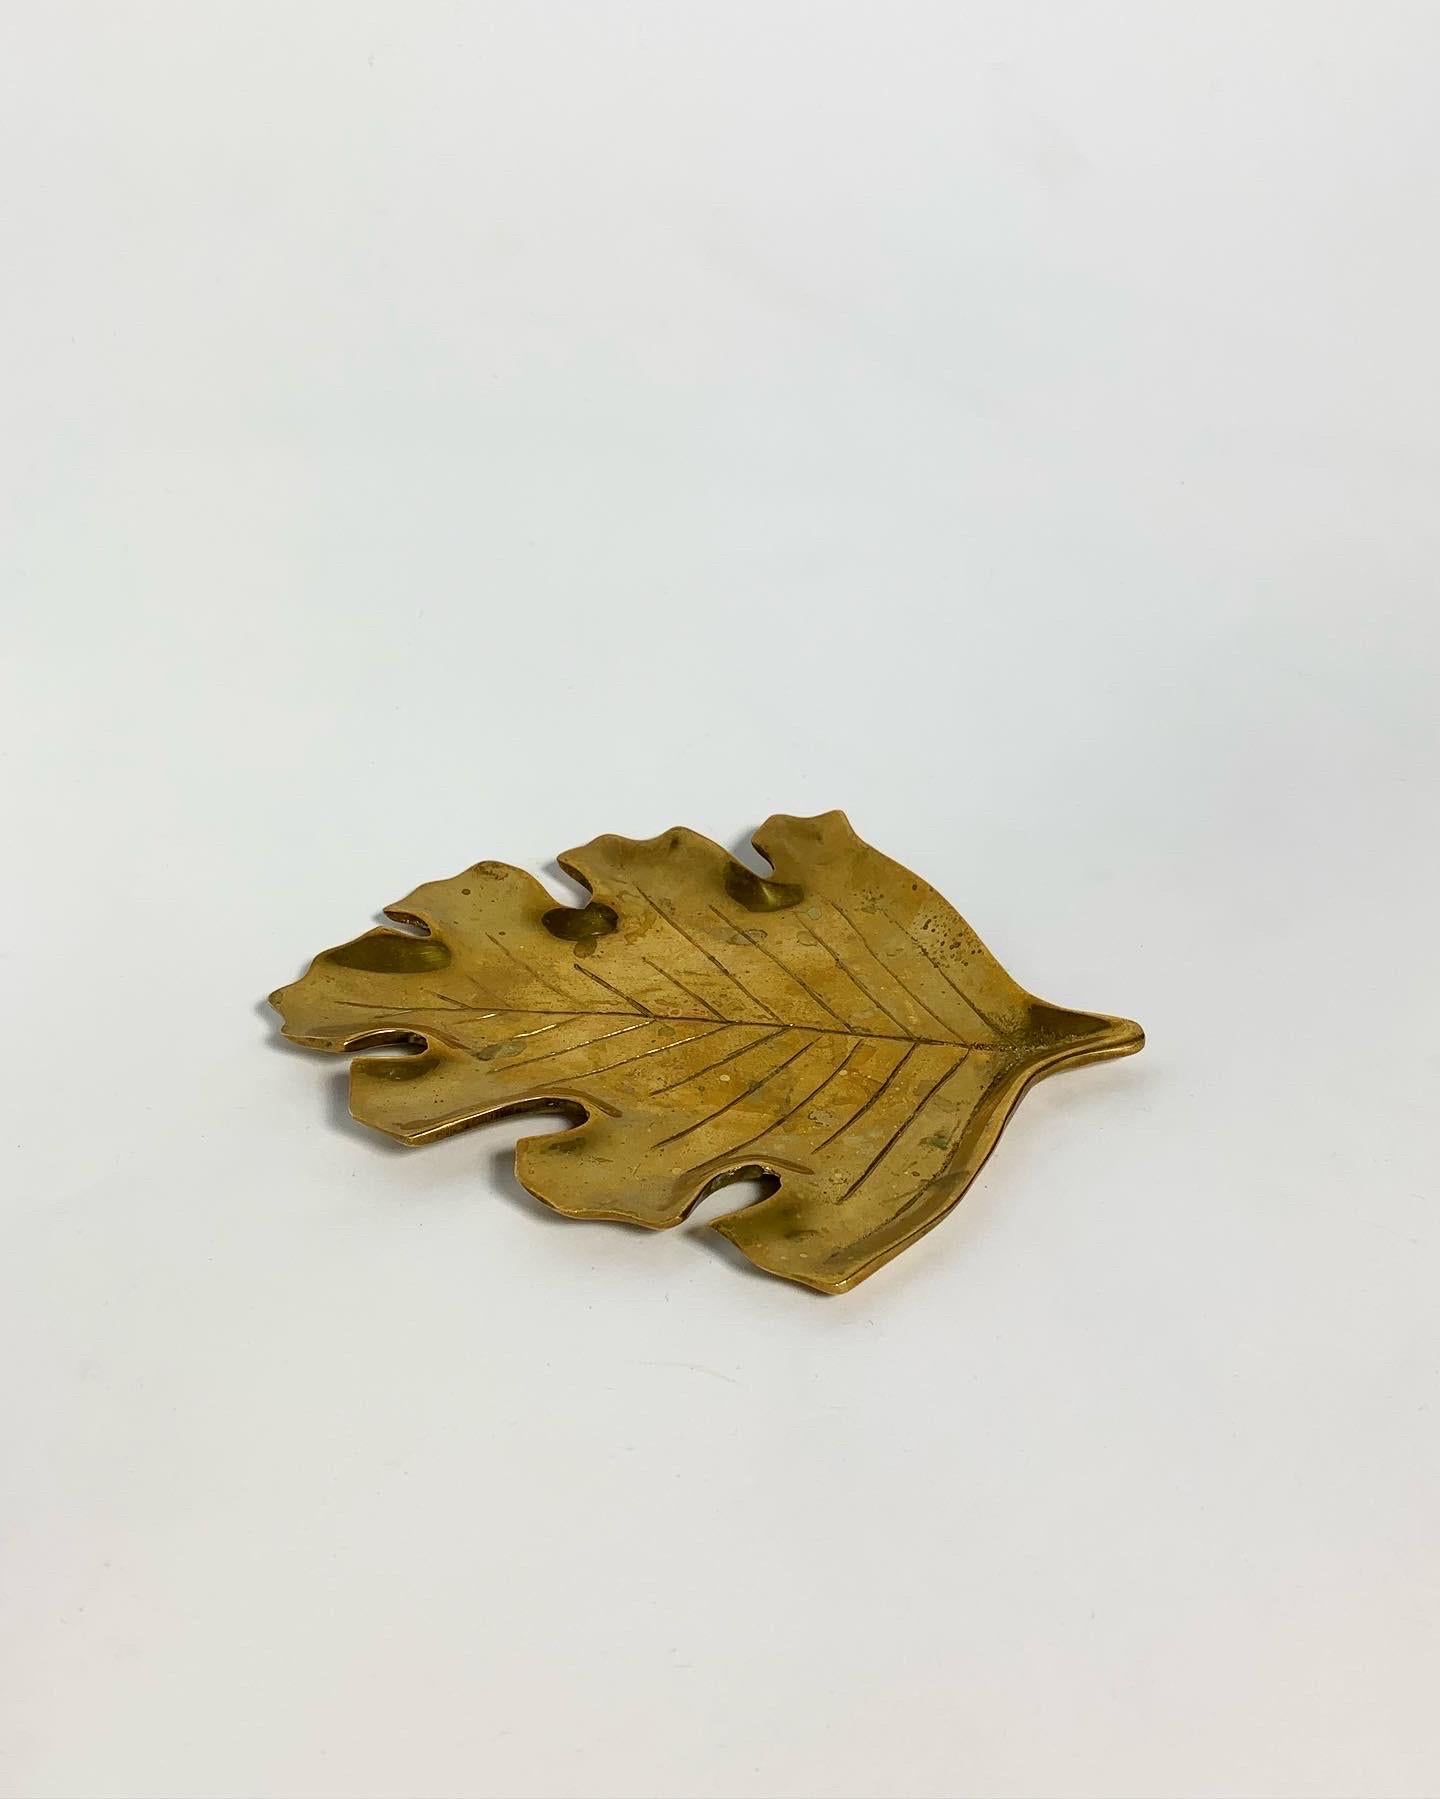 Rare brass leaf plate designed in 1936 for Svenskt Tenn by unknown designer but probably Josef Frank, information provided by the manufacturer. 

Hand-crafted of solid brass with a beautiful patina.

This piece would make a wonderful catch-all